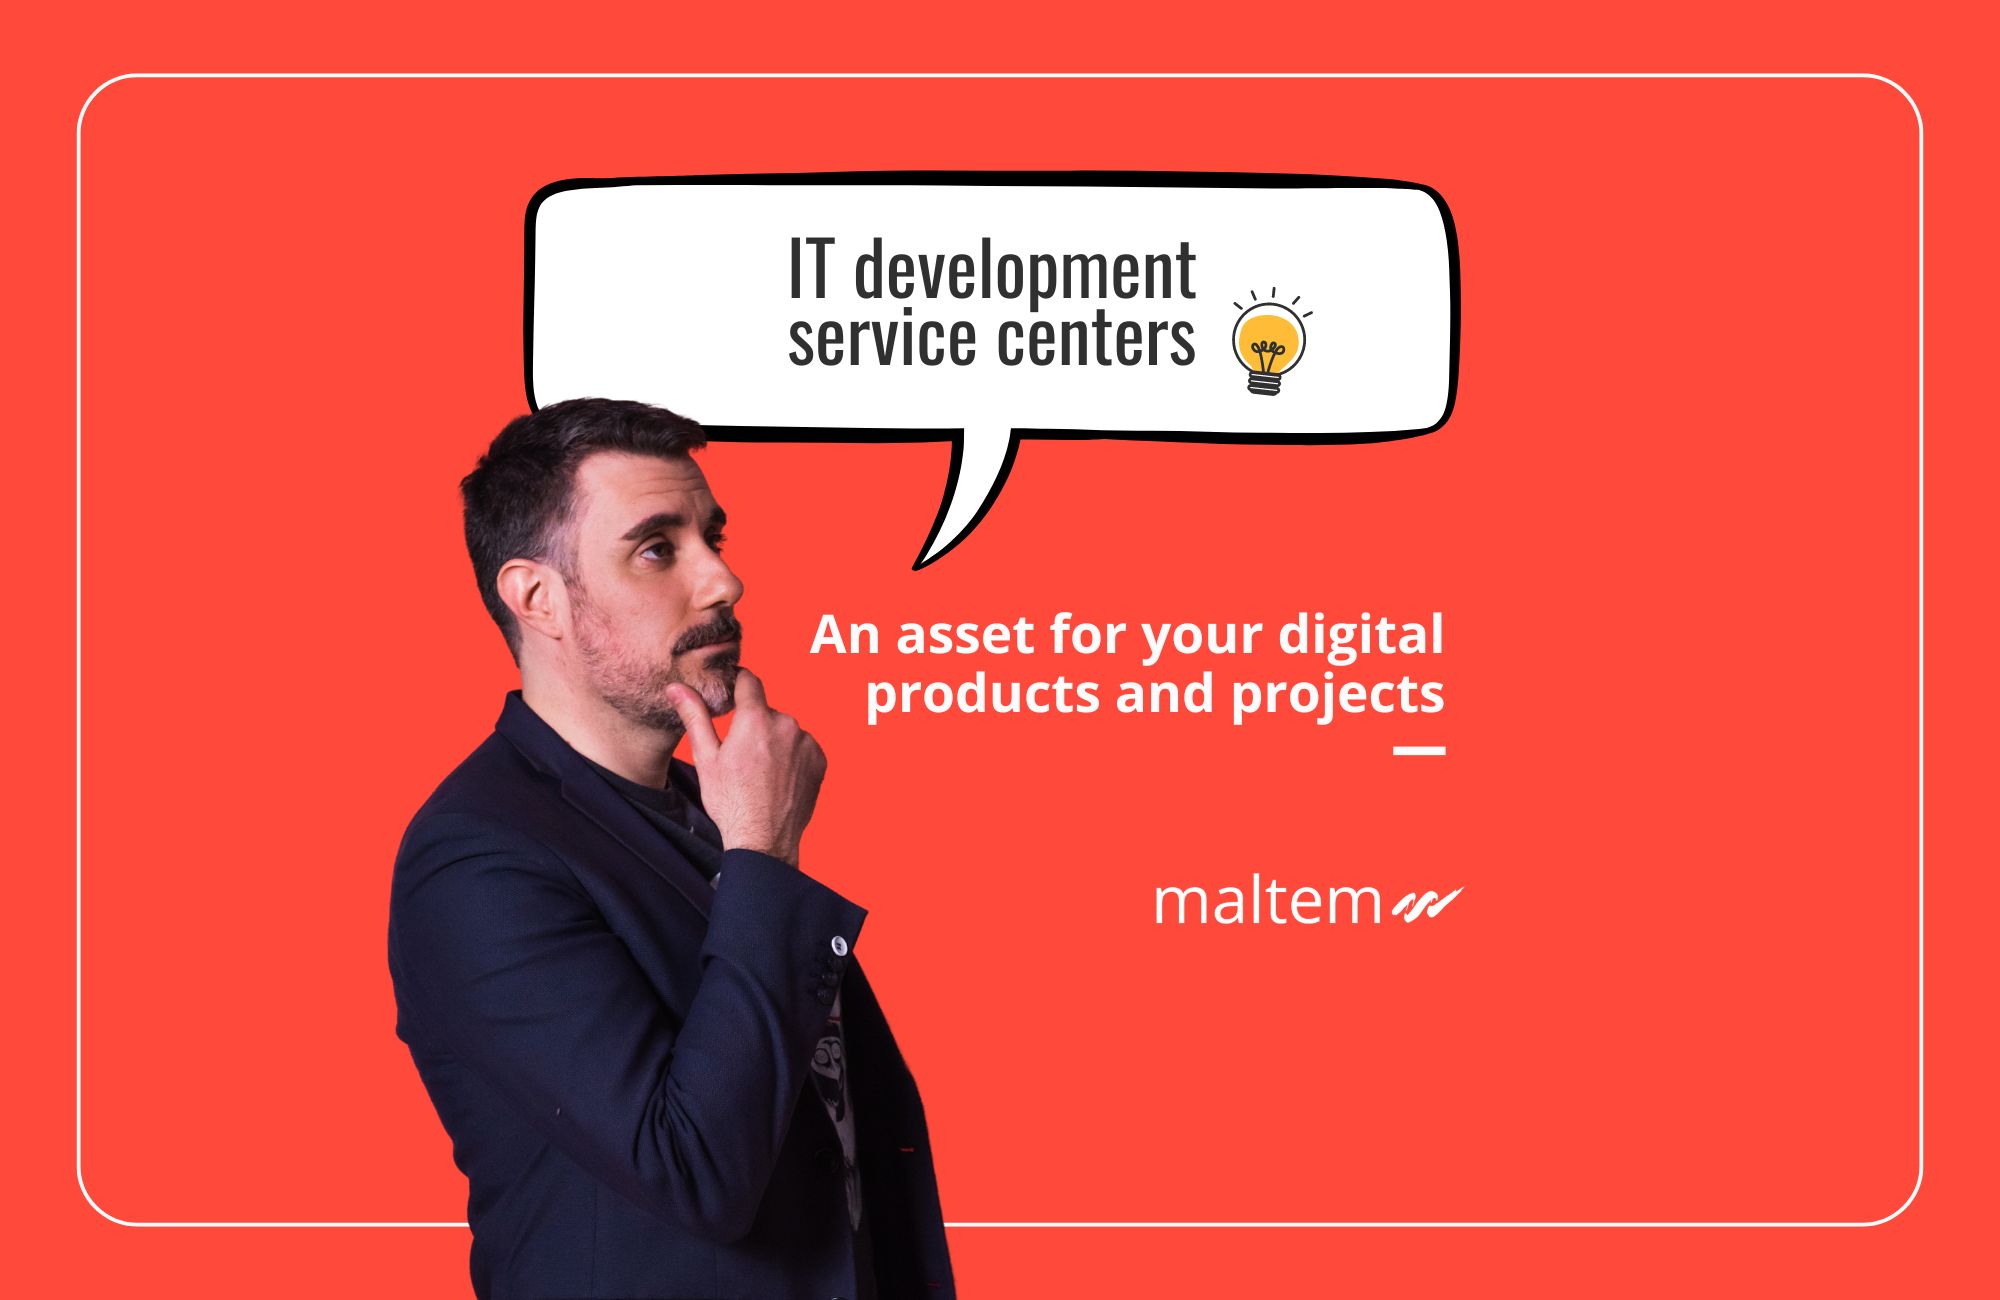 IT development service centers: an asset for your digital products and projects